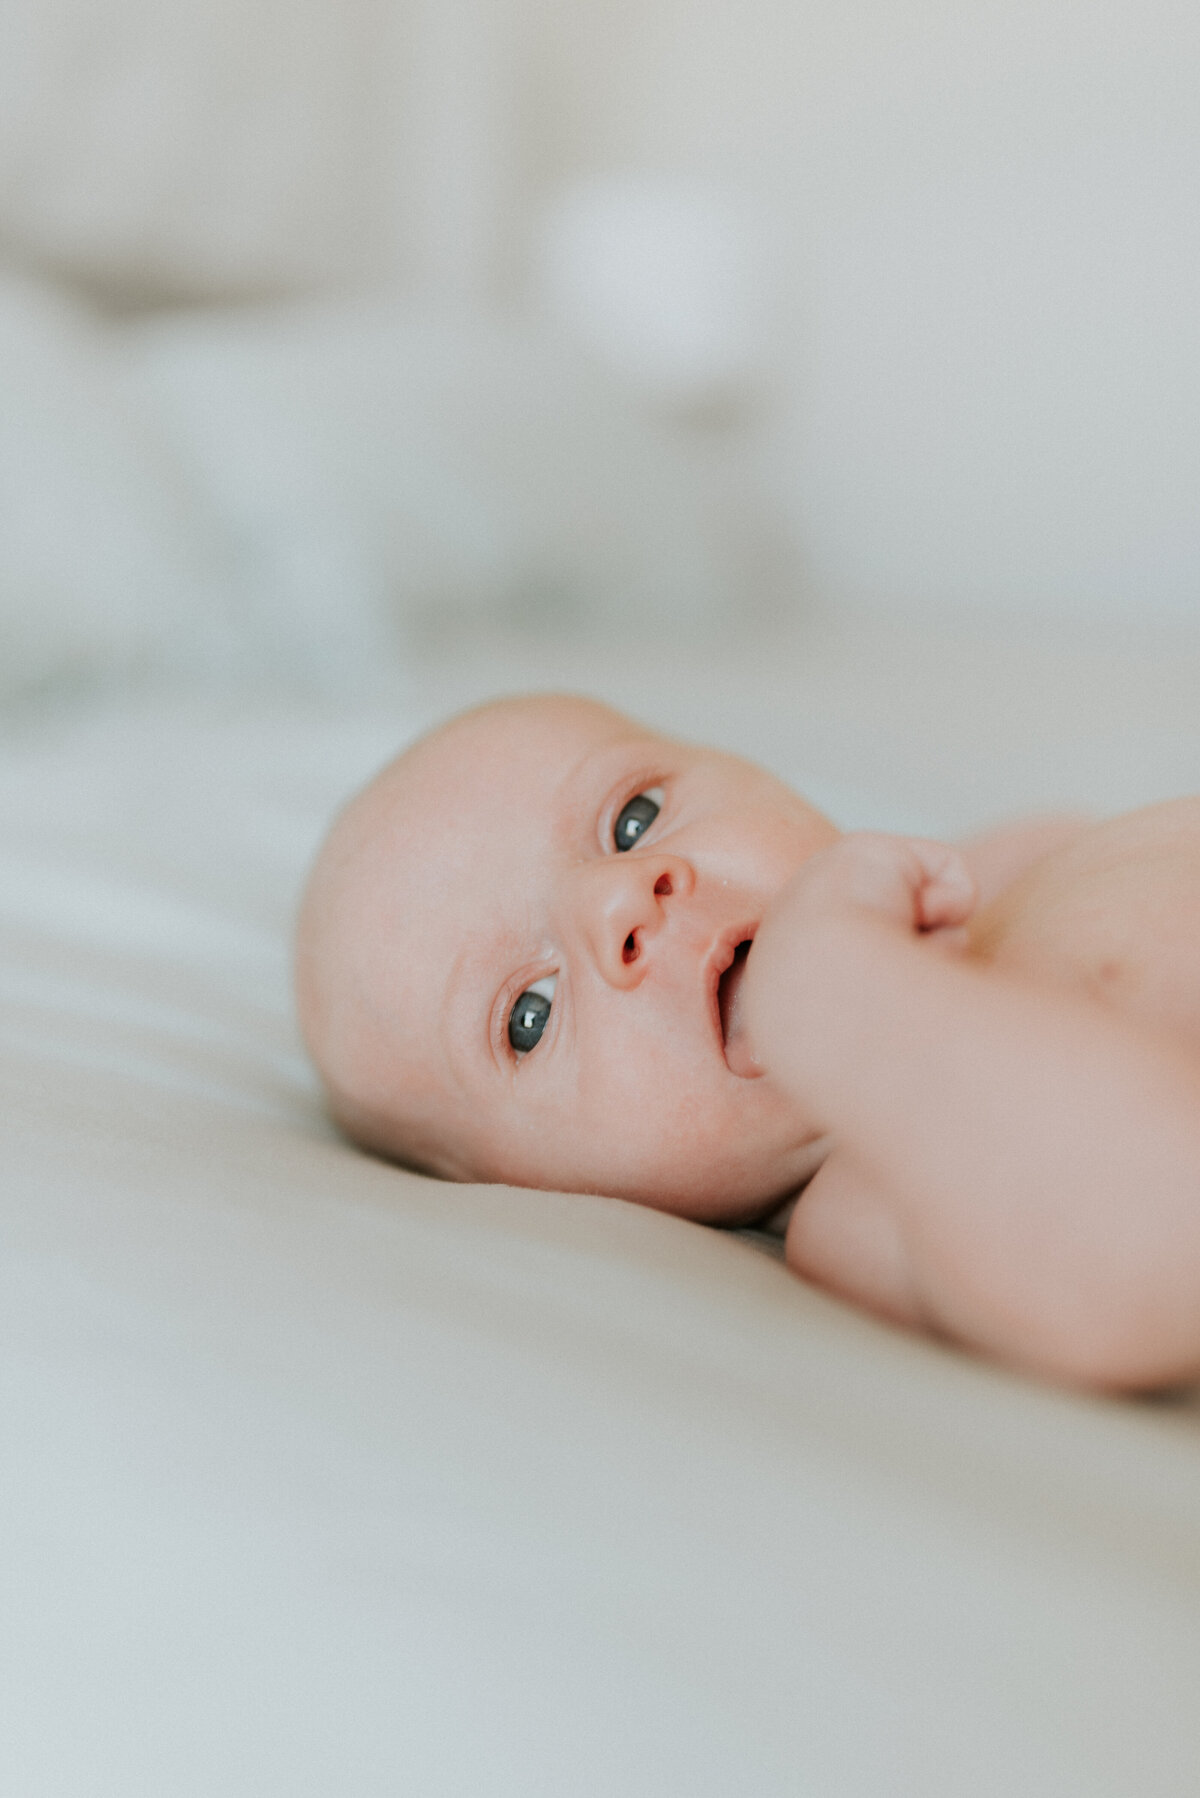 Capturing innocence with in-home newborn photography in St. Paul. Shannon Kathleen Photography creates timeless portraits that reflect the purity of your baby's early days.